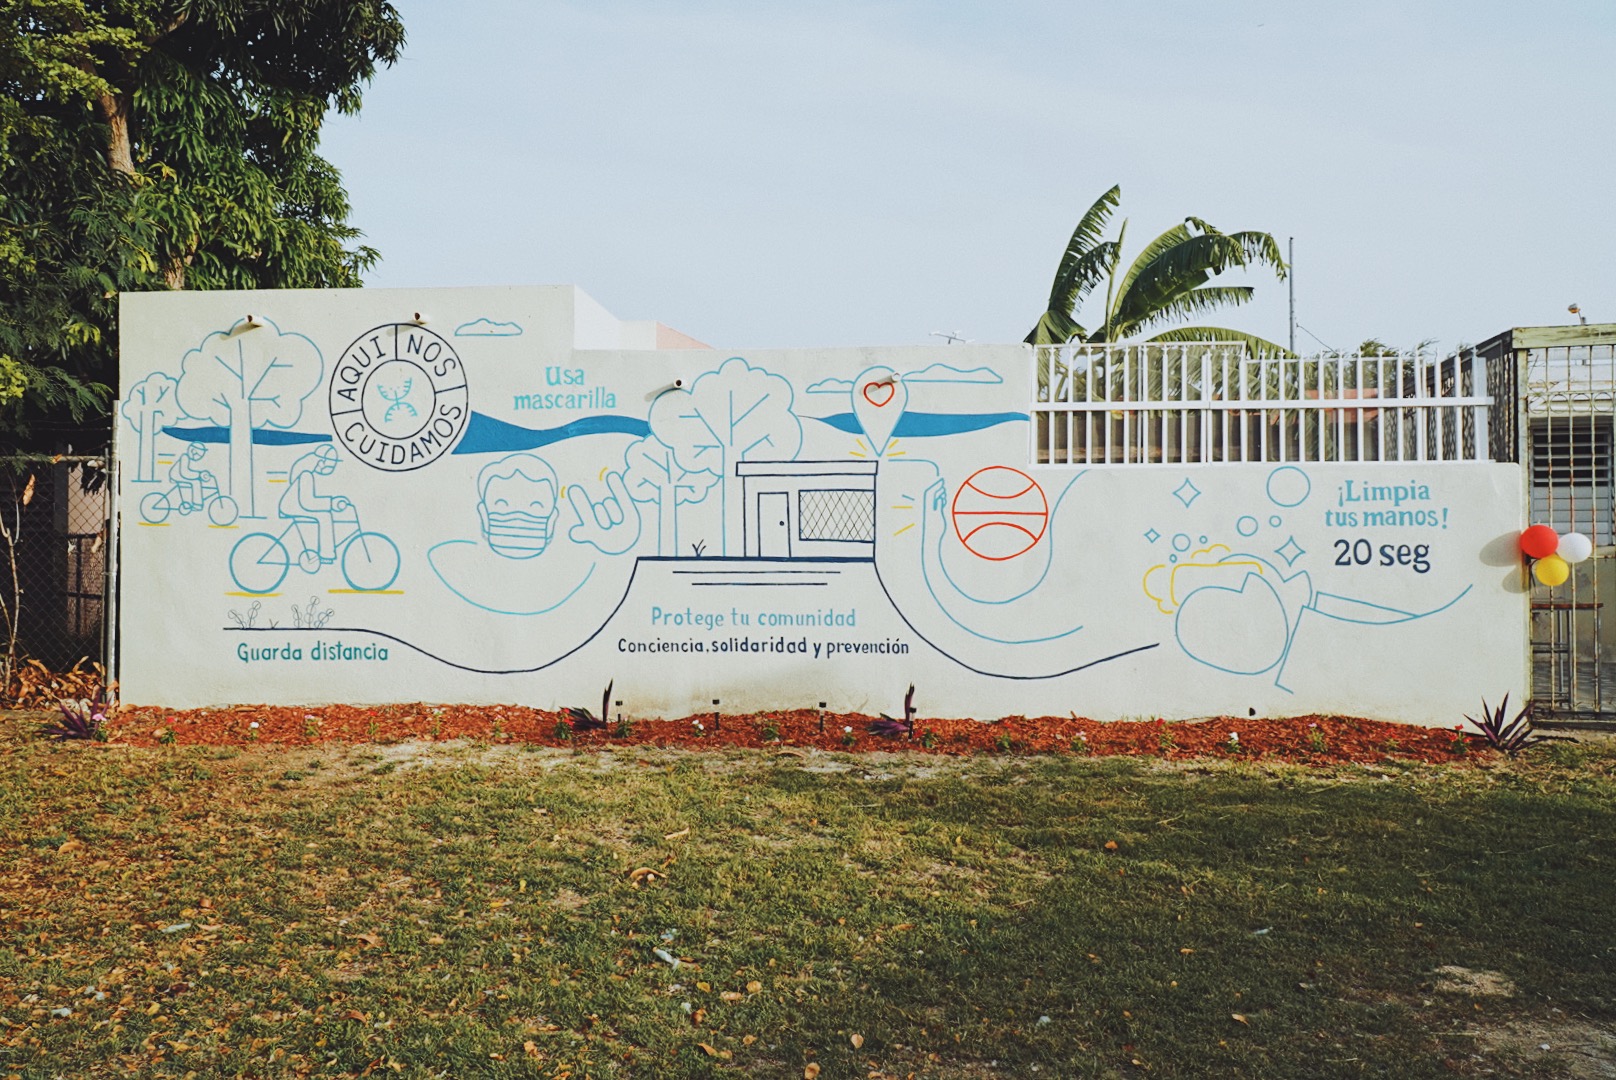 Picture of a Mural in a park with the logo of Aqui Nos cuidamos and that says in Spanish: Protege tu comunidad (protect your community) and with picture of handwashing and mask wearing.